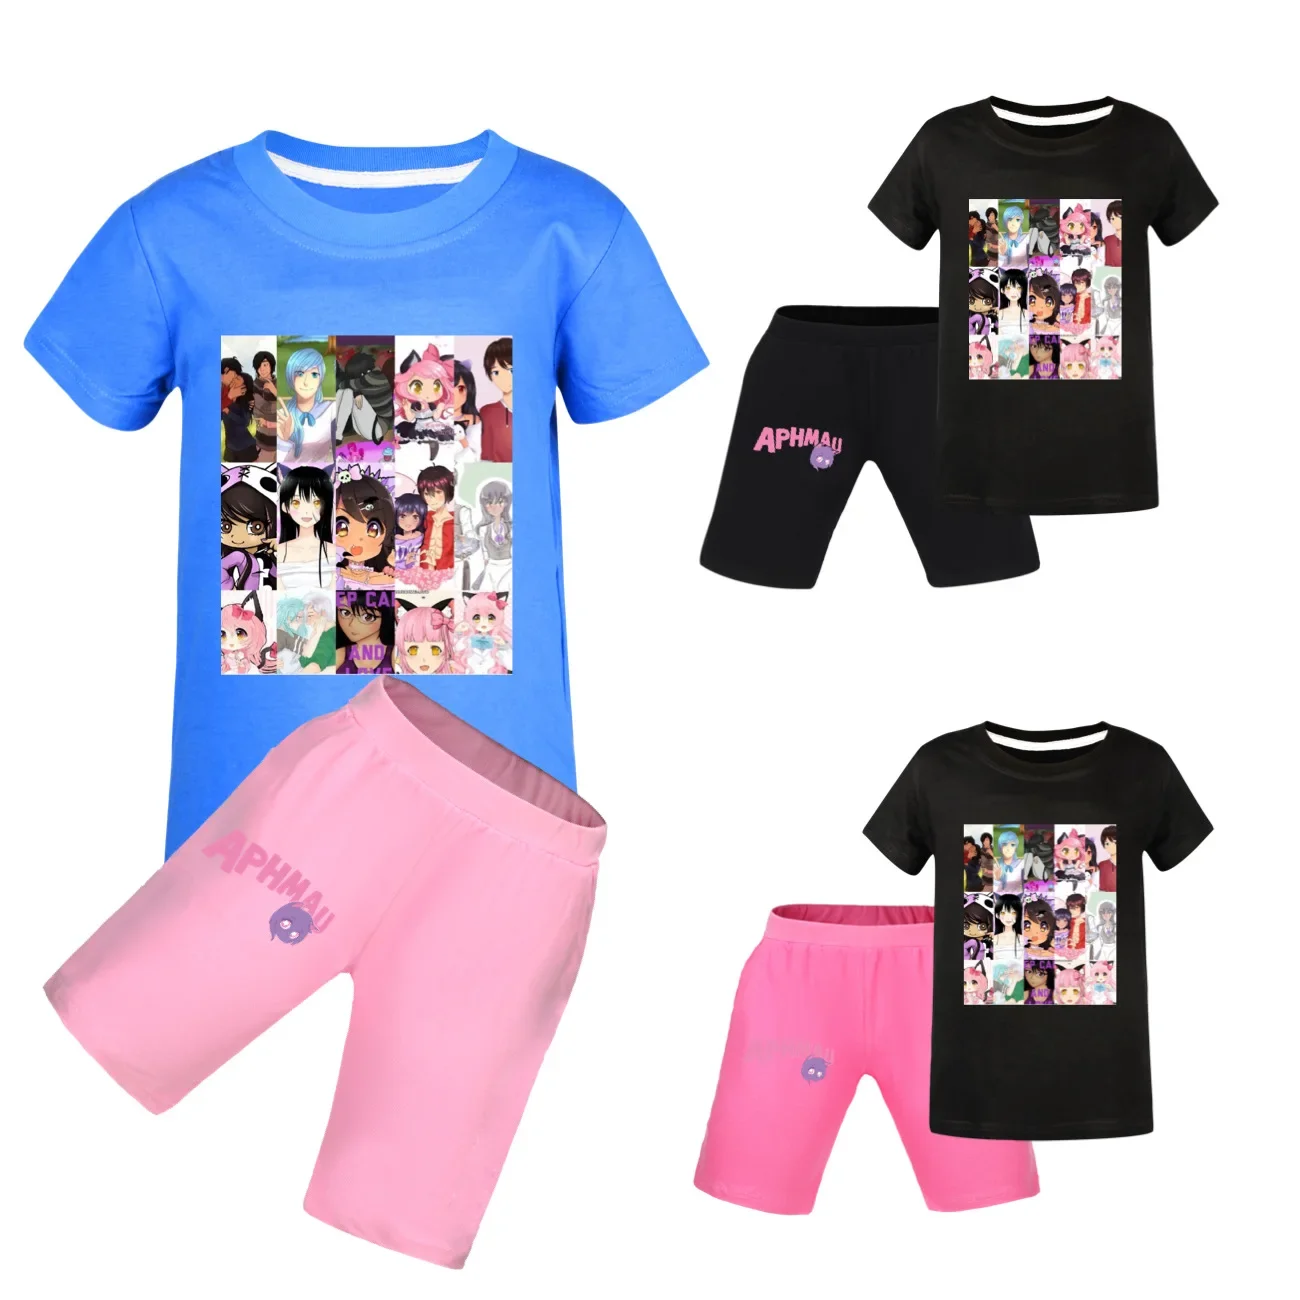 

2-14Years APHMAU Cat Clothes Kids Aaron Lycan T Shirt Toddler Girls Boutique Outfits Baby Boys Short Sleeve Tops Shorts 2pcs Set